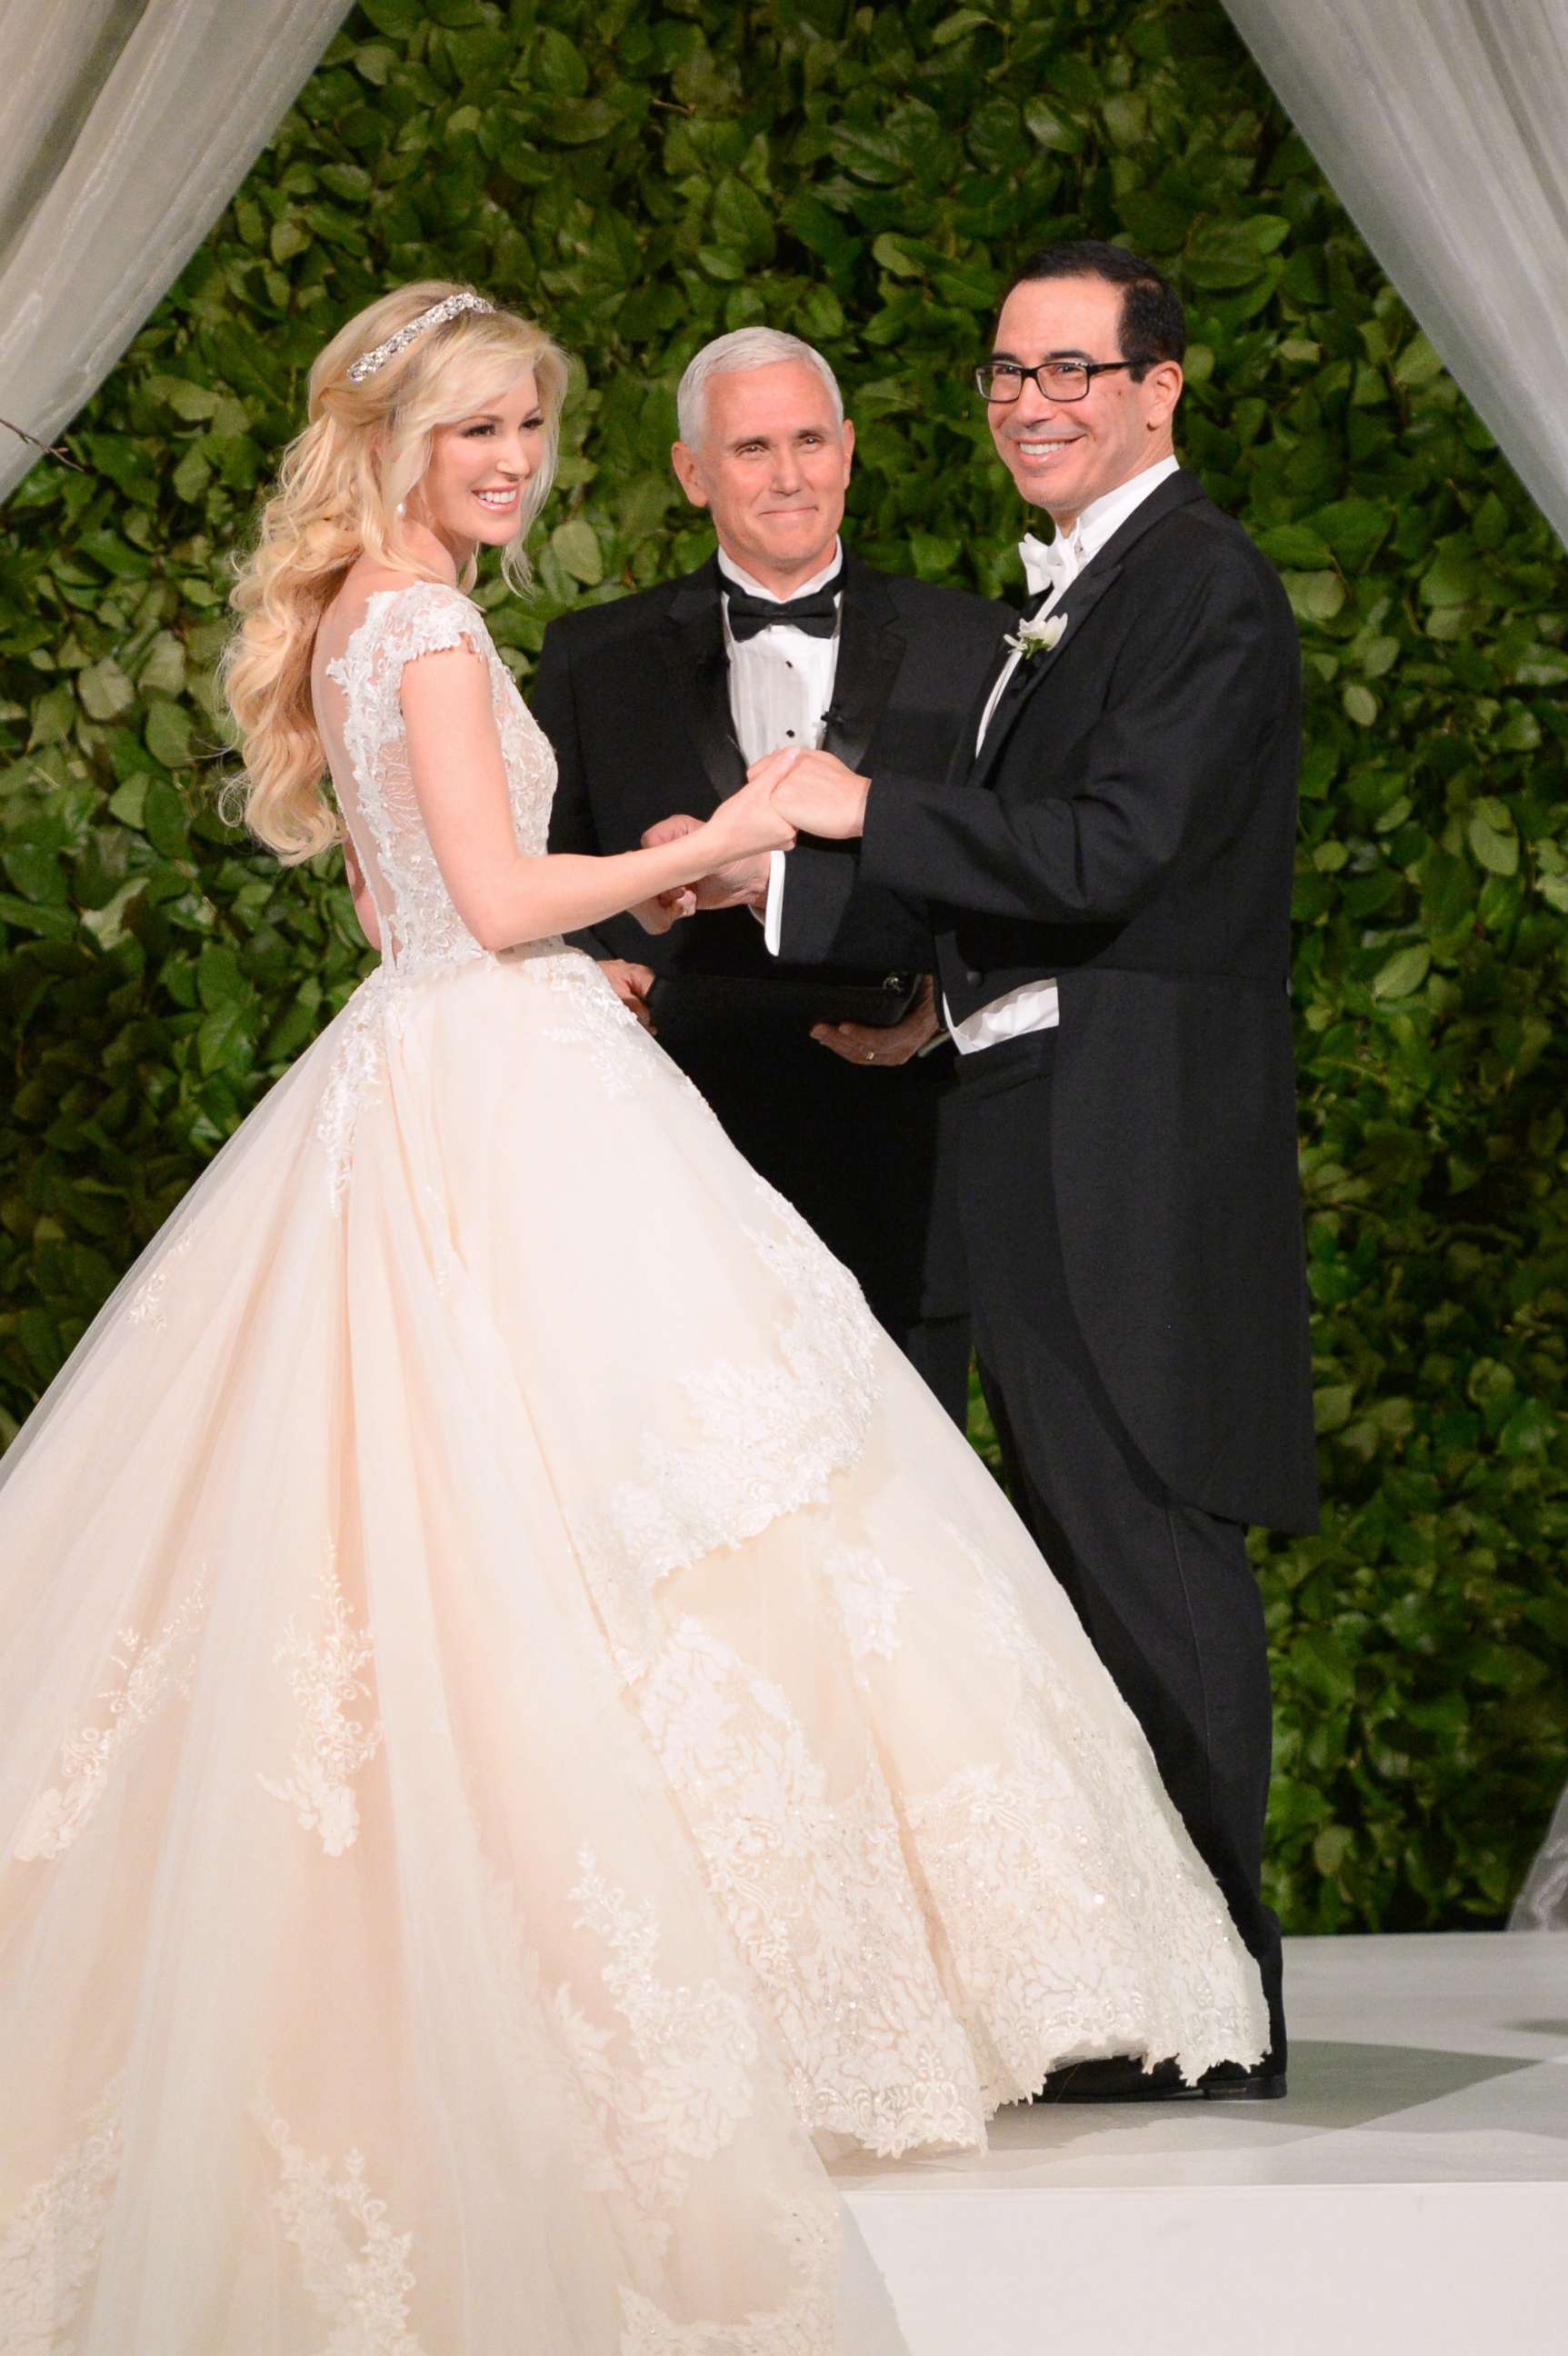 PHOTO: Vice President Mike Pence, center, officiates the wedding of  Louise Linton, left, and Secretary of the Treasury Steven Mnuchin, June 24, 2017 at Andrew Mellon Auditorium in Washington, D.C. 